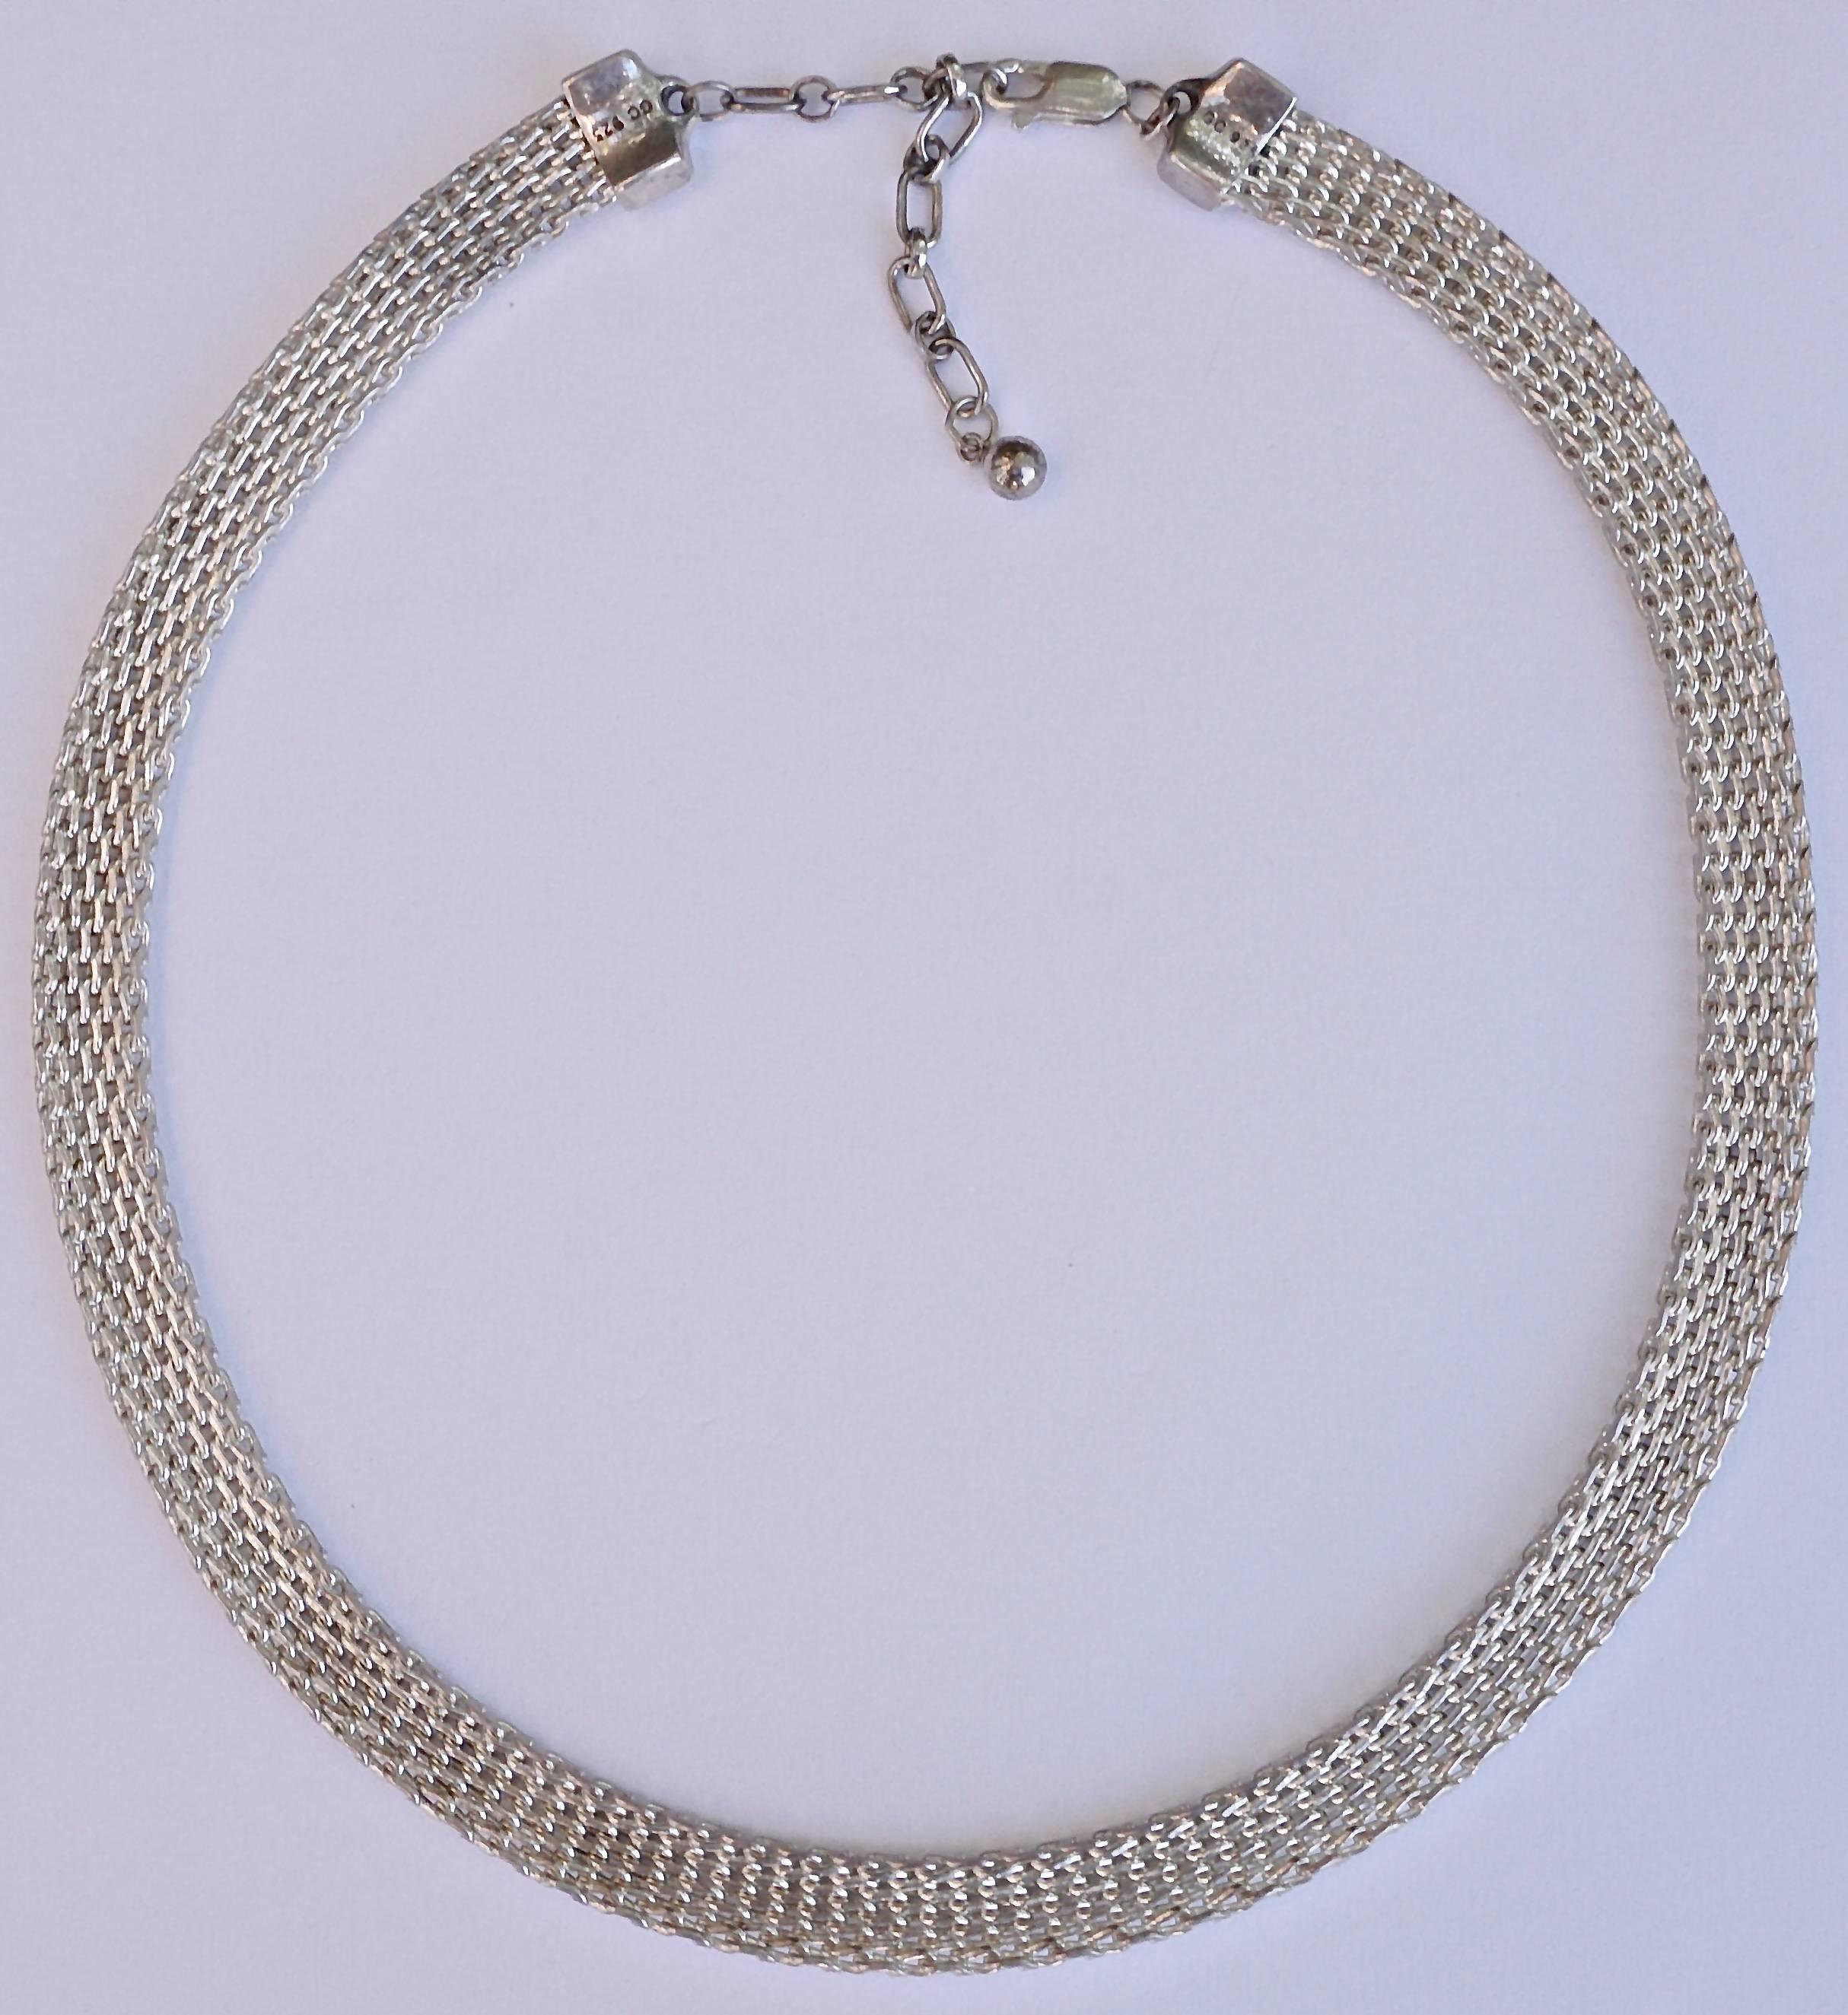 Lovely polished sterling silver mesh necklace, stamped GC 925. Width 8mm, .31 inch, and length 41cm, 16.1 inches, plus the extension chain of 5cm, 1.9 inches, total length 46cm, 18 inches.

In excellent condition, this is a classic vintage silver